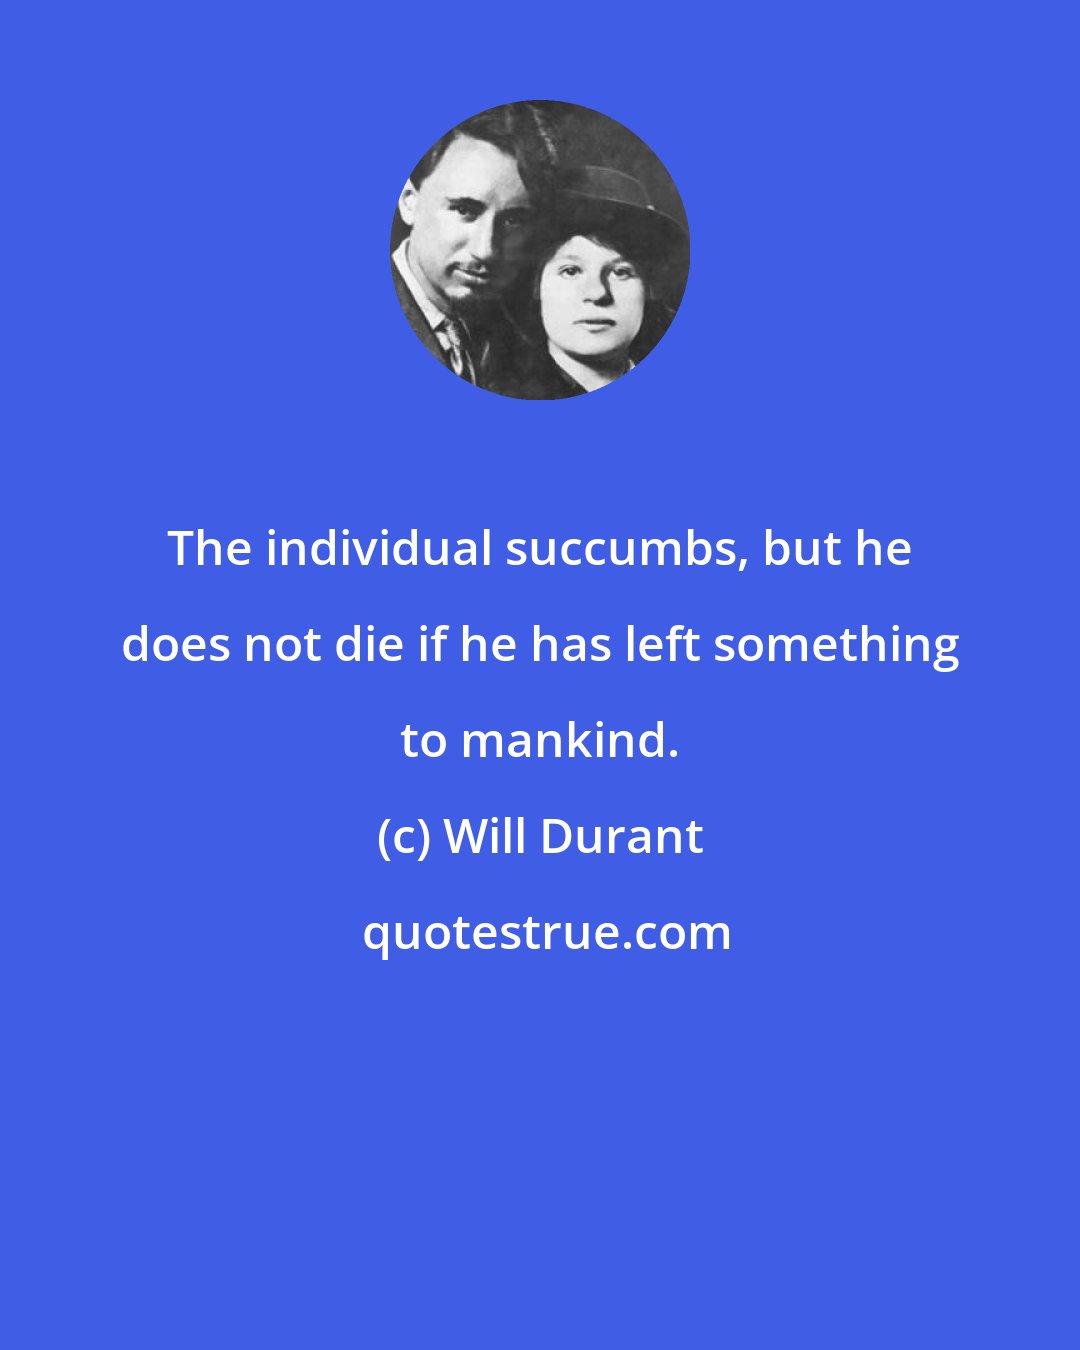 Will Durant: The individual succumbs, but he does not die if he has left something to mankind.